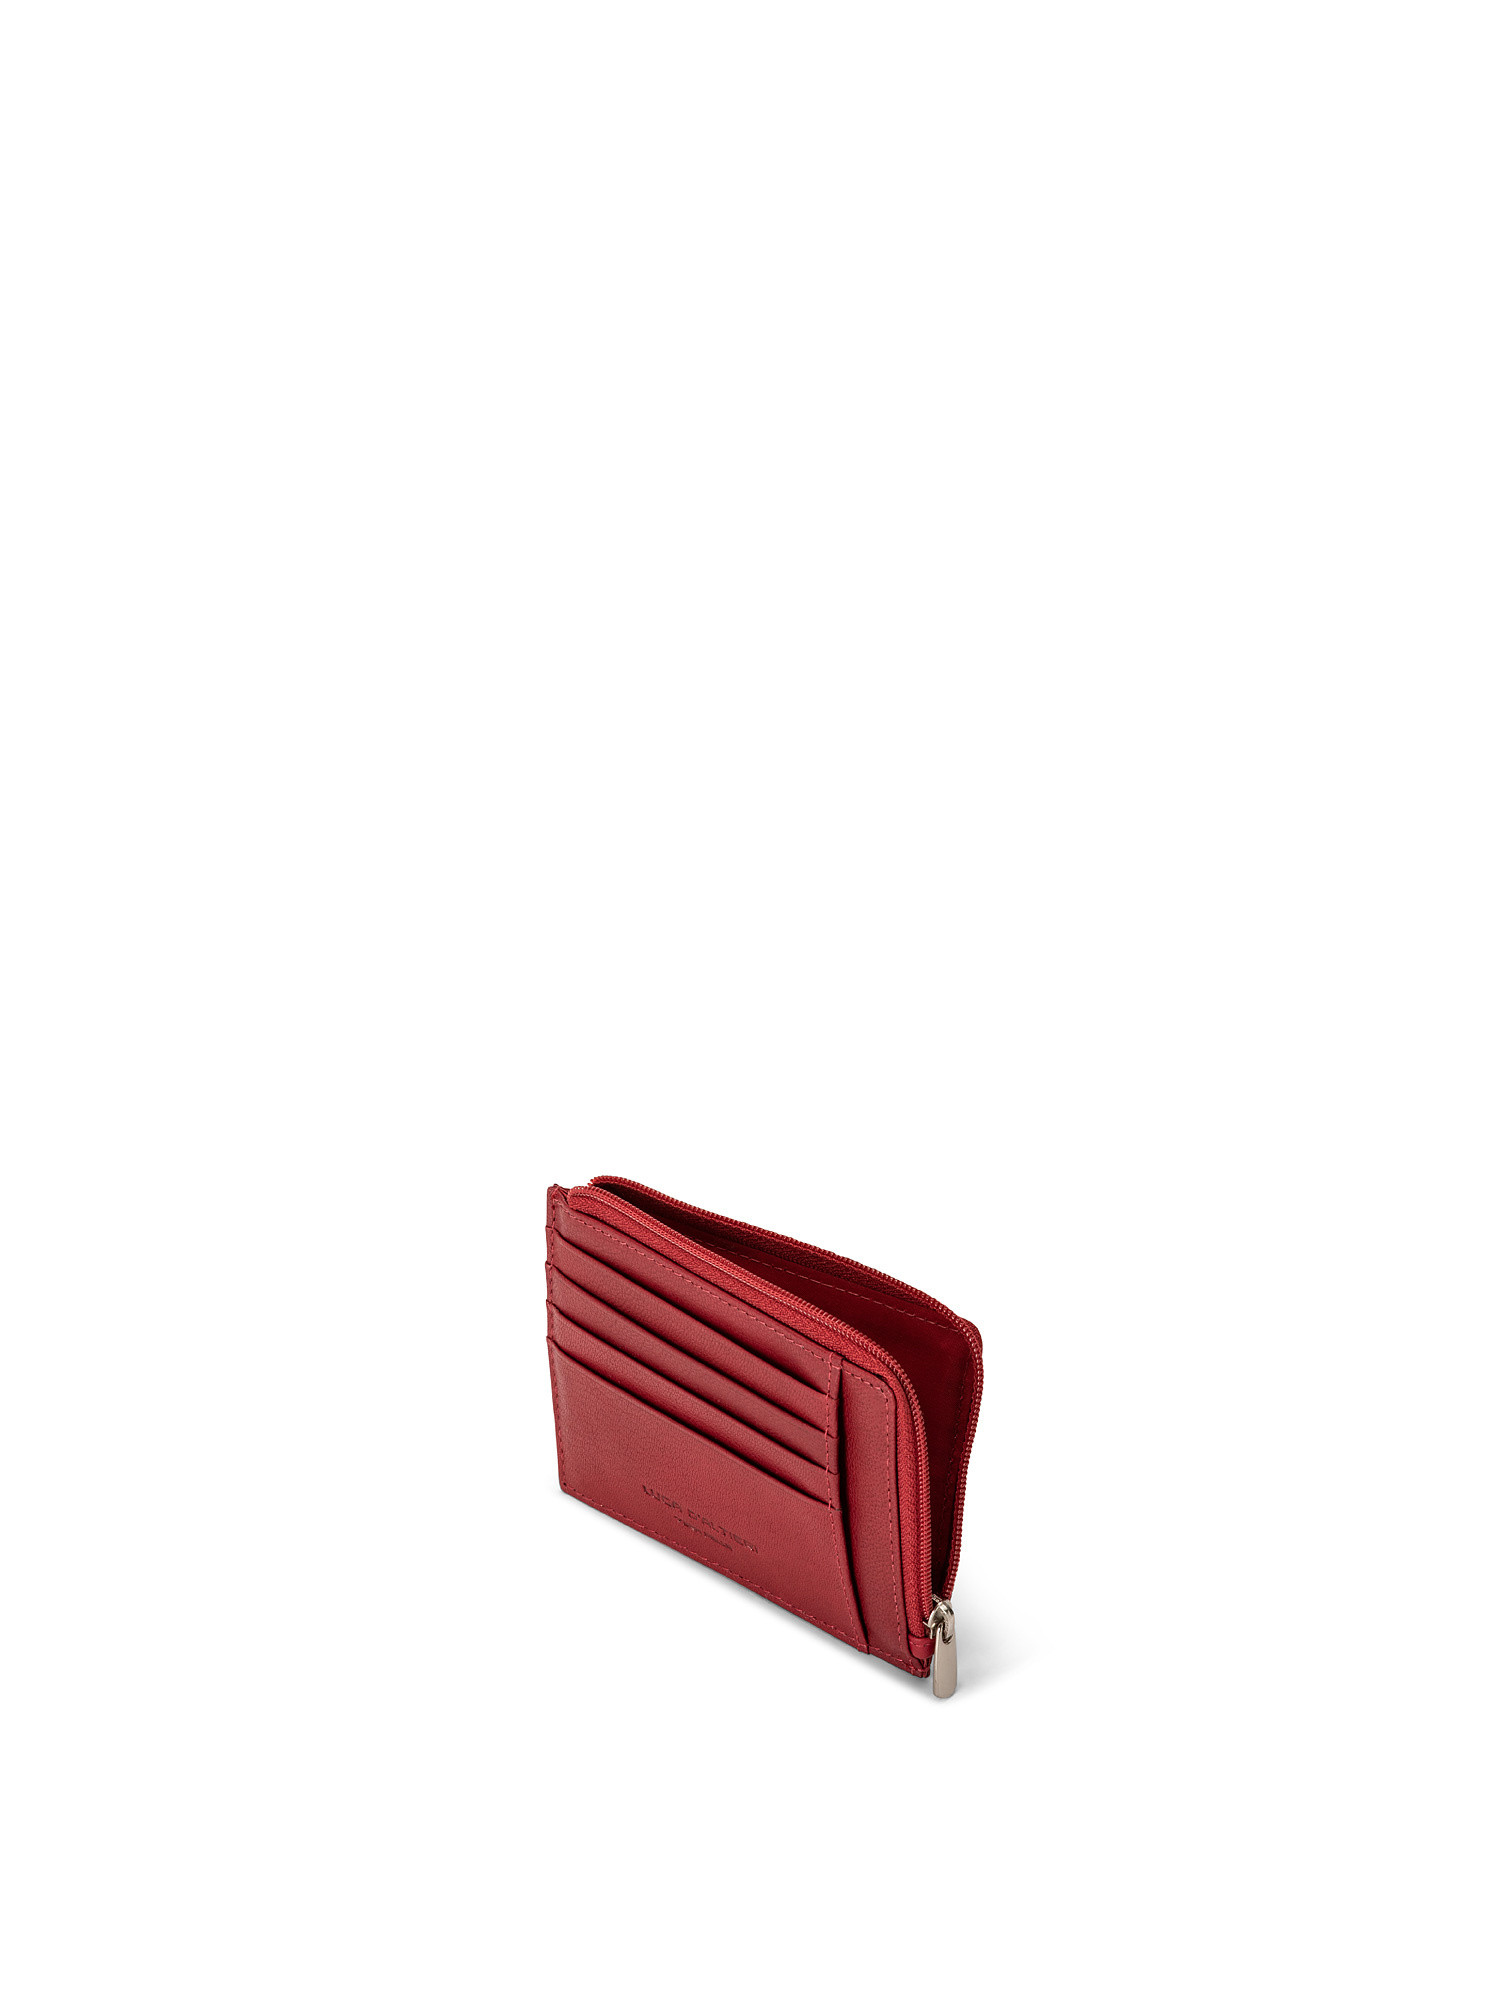 Small genuine leather wallet, Brick Red, large image number 1